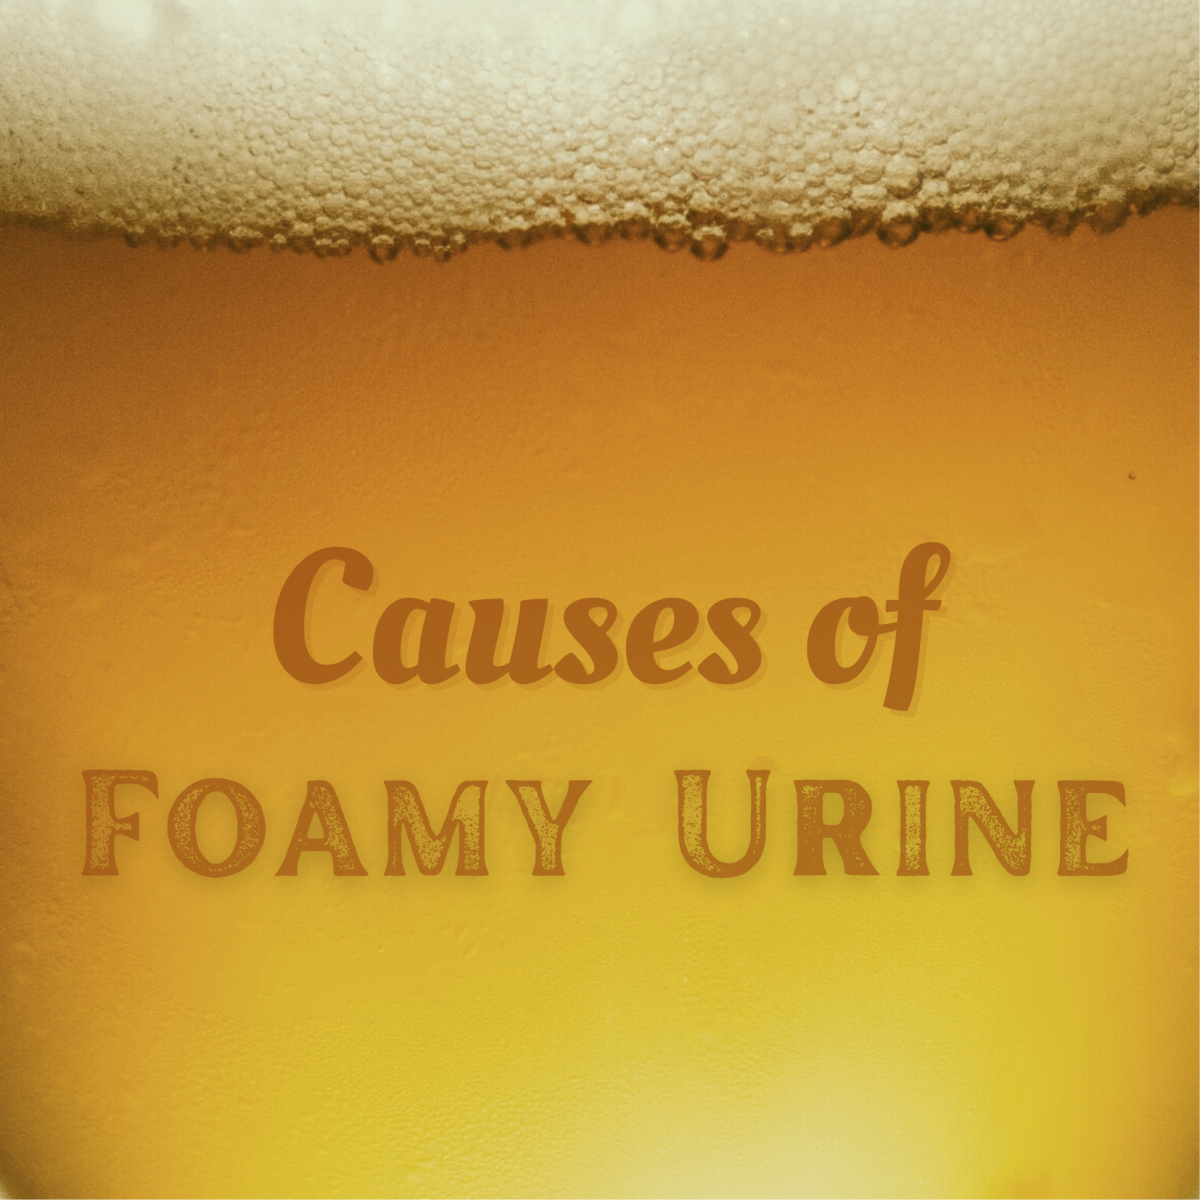 Foamy Urine Causes: How Much Foam in Urine Is Normal?